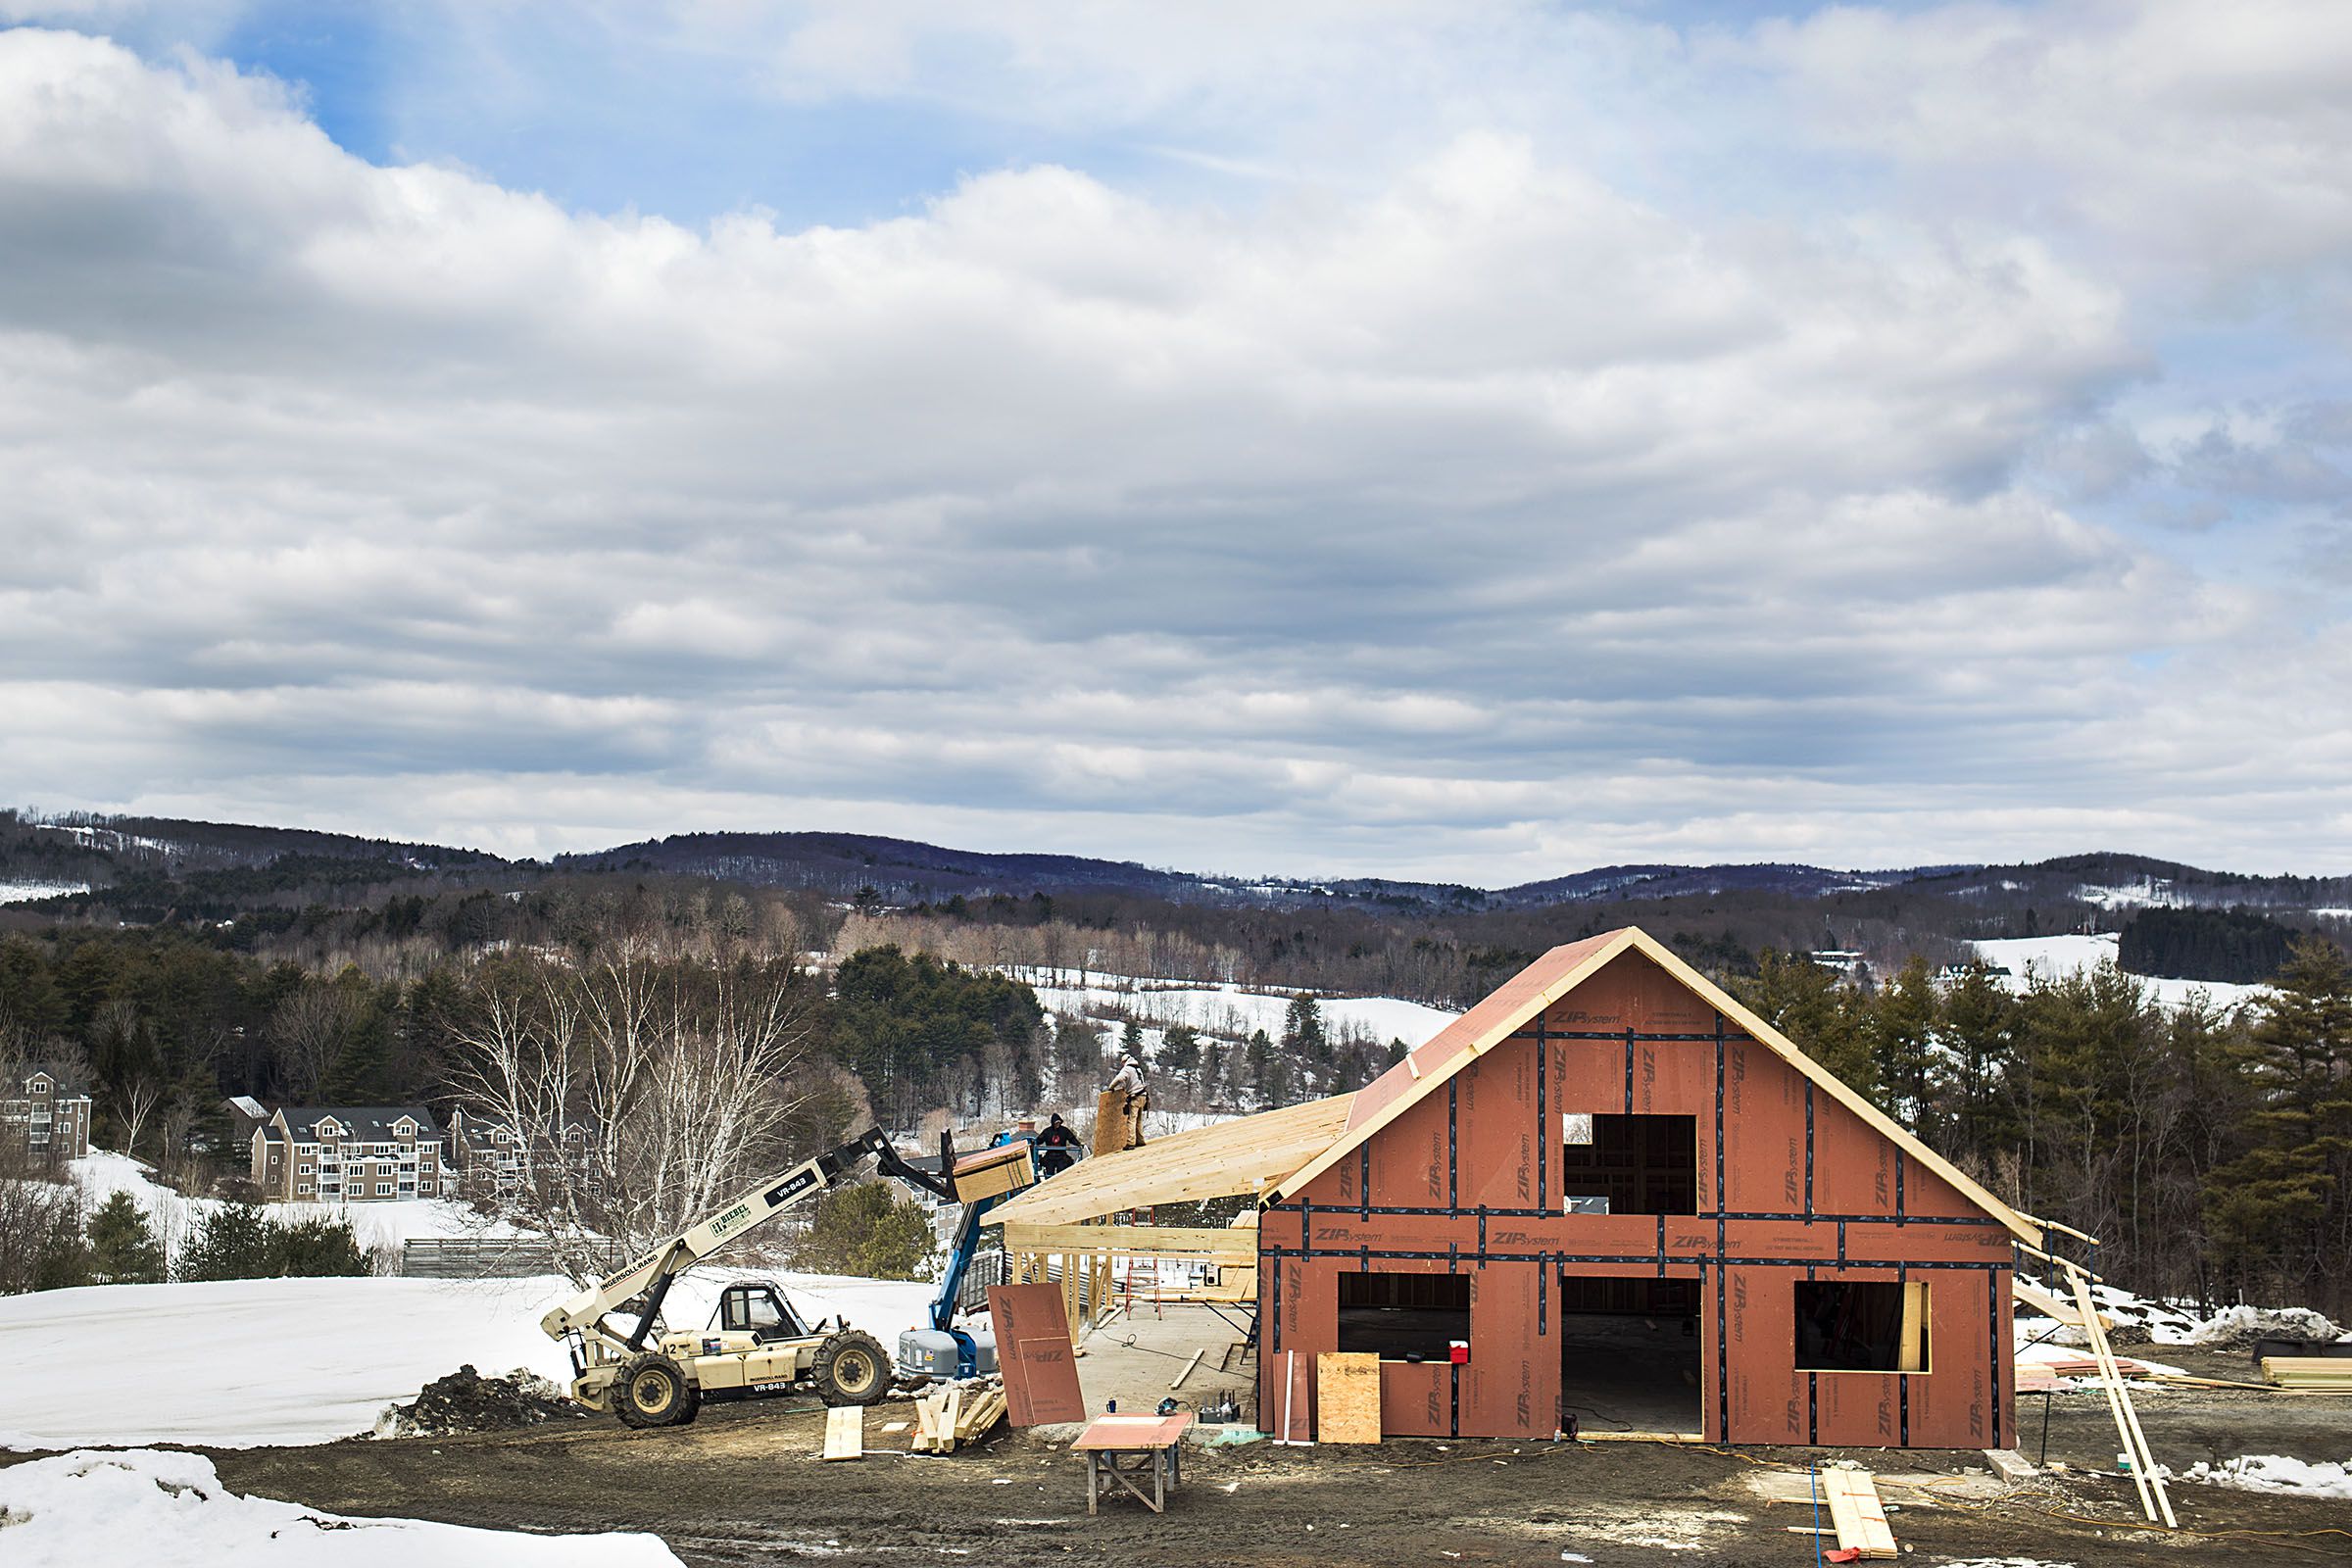 A construction crew works to finish the structure of a building on the foundation of the base lodge of the former Ascutney Mountain Resort in West Windsor, Vt., on March 23, 2018. Ascutney Outdoors member Glenn Seward said the project aims to be completed by the end of July 2018. "This has been a big part of the community," Seward said. "To see it continue on is very exciting." (Valley News - Carly Geraci) Copyright Valley News. May not be reprinted or used online without permission. Send requests to permission@vnews.com.